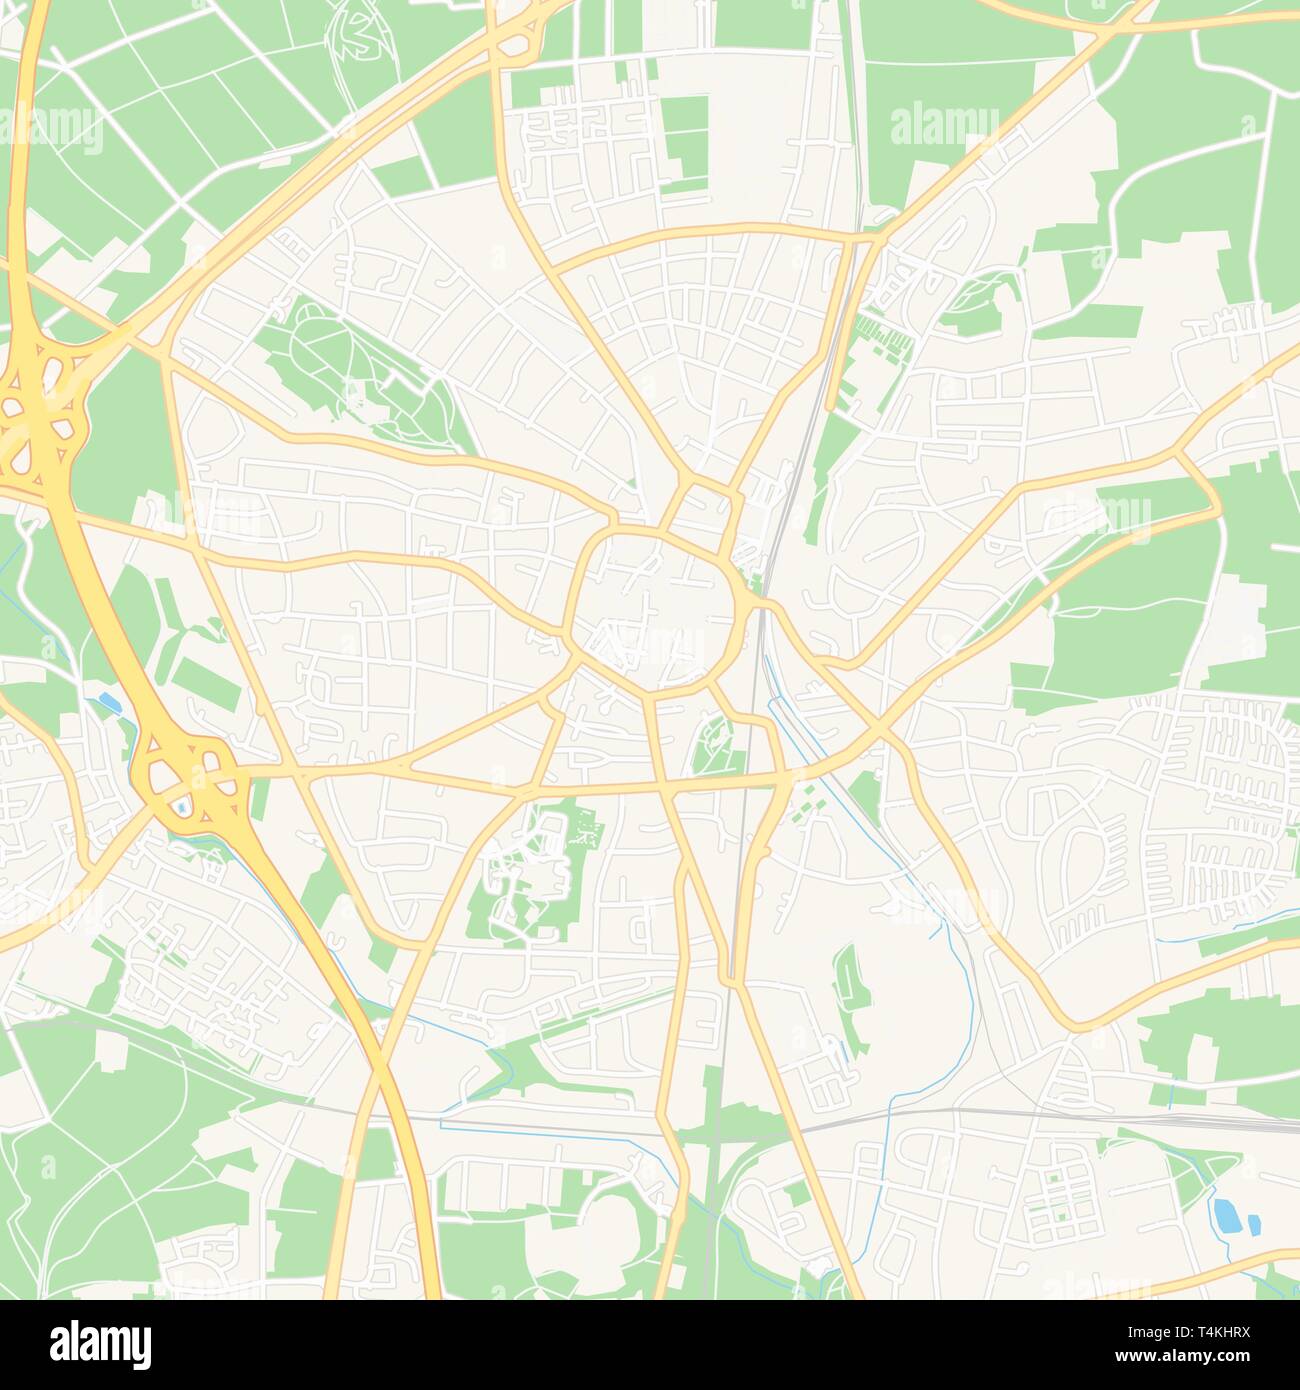 Printable map of Recklinghausen, Germany with main and secondary roads and larger railways. This map is carefully designed for routing and placing ind Stock Vector